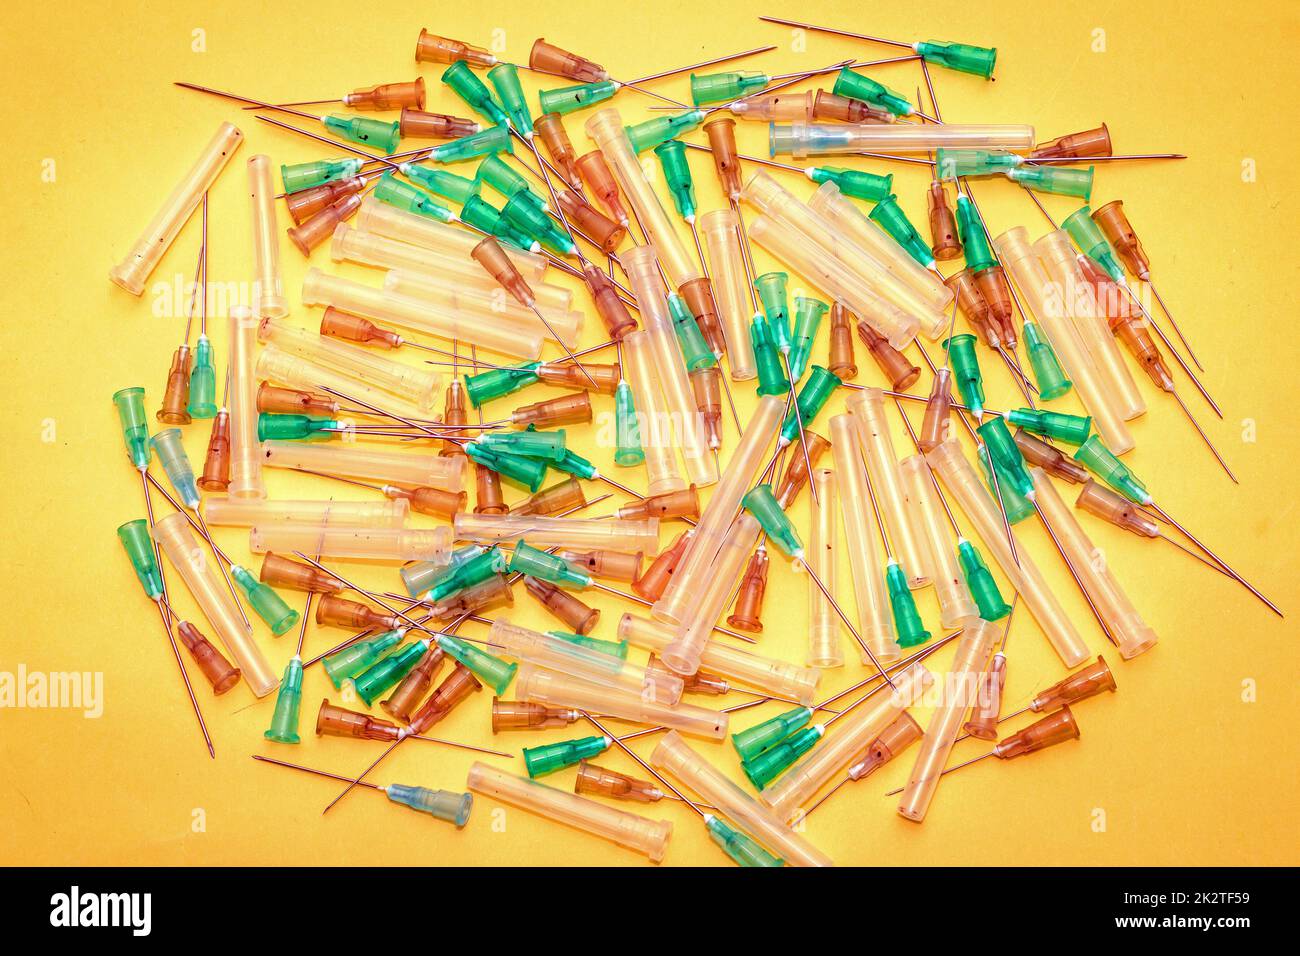 Dirty used infectious needles pile Stock Photo